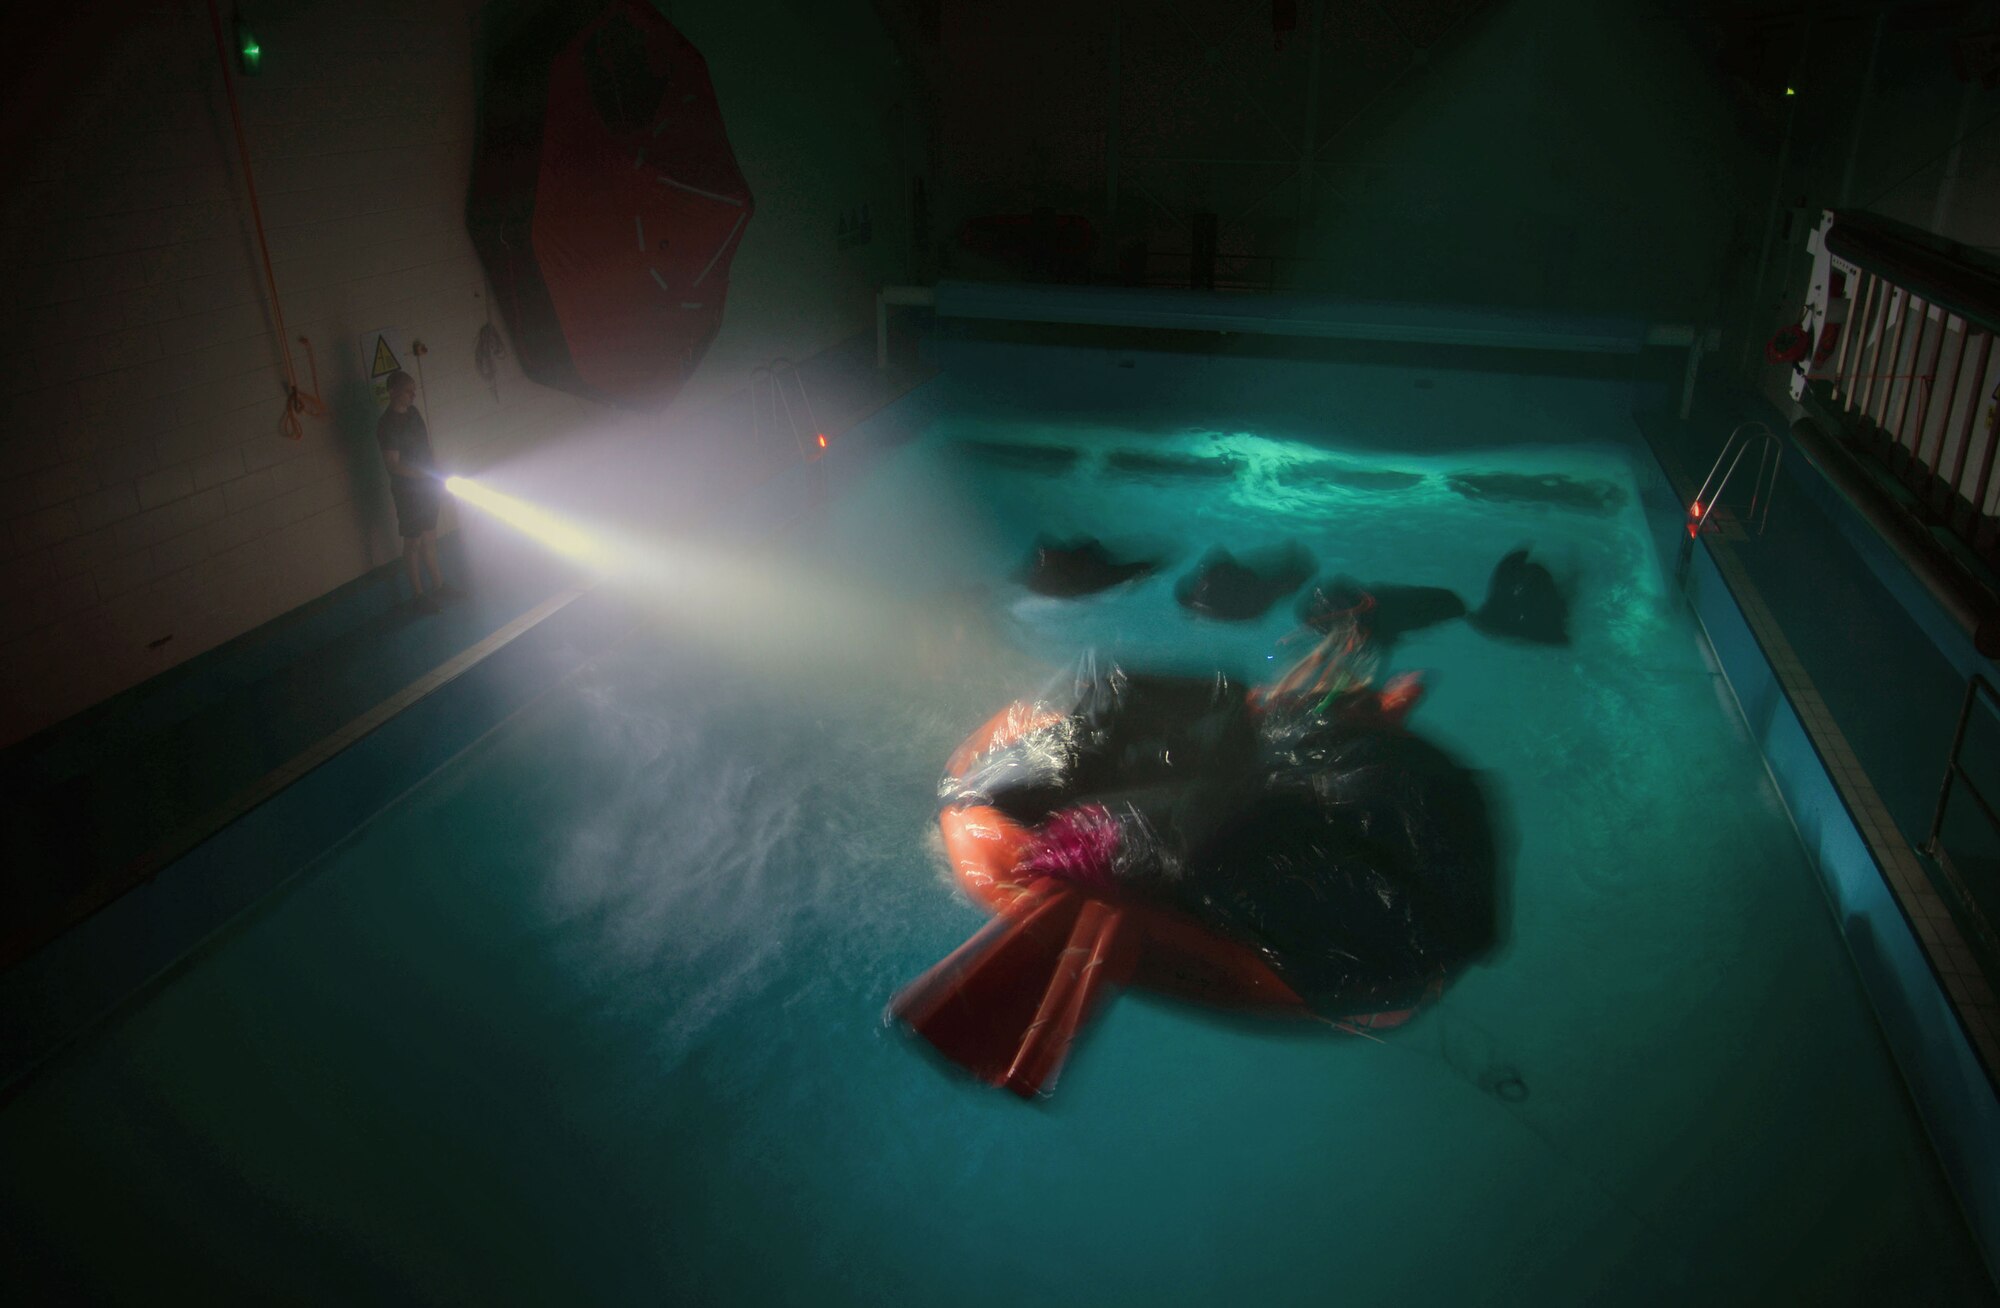 U.S. Air Force Airmen undergo an exercise during Survival, Evasion, Resistance and Escape Water Survival Training March 10, 2017, at Lowestoft College, Maritime and Offshore Facilities, England. Once Airmen are instructed on how to properly survive in the water, they’re put through an exercise to test their survival skills. (U.S. Air Force photo by Senior Airman Christine Halan)